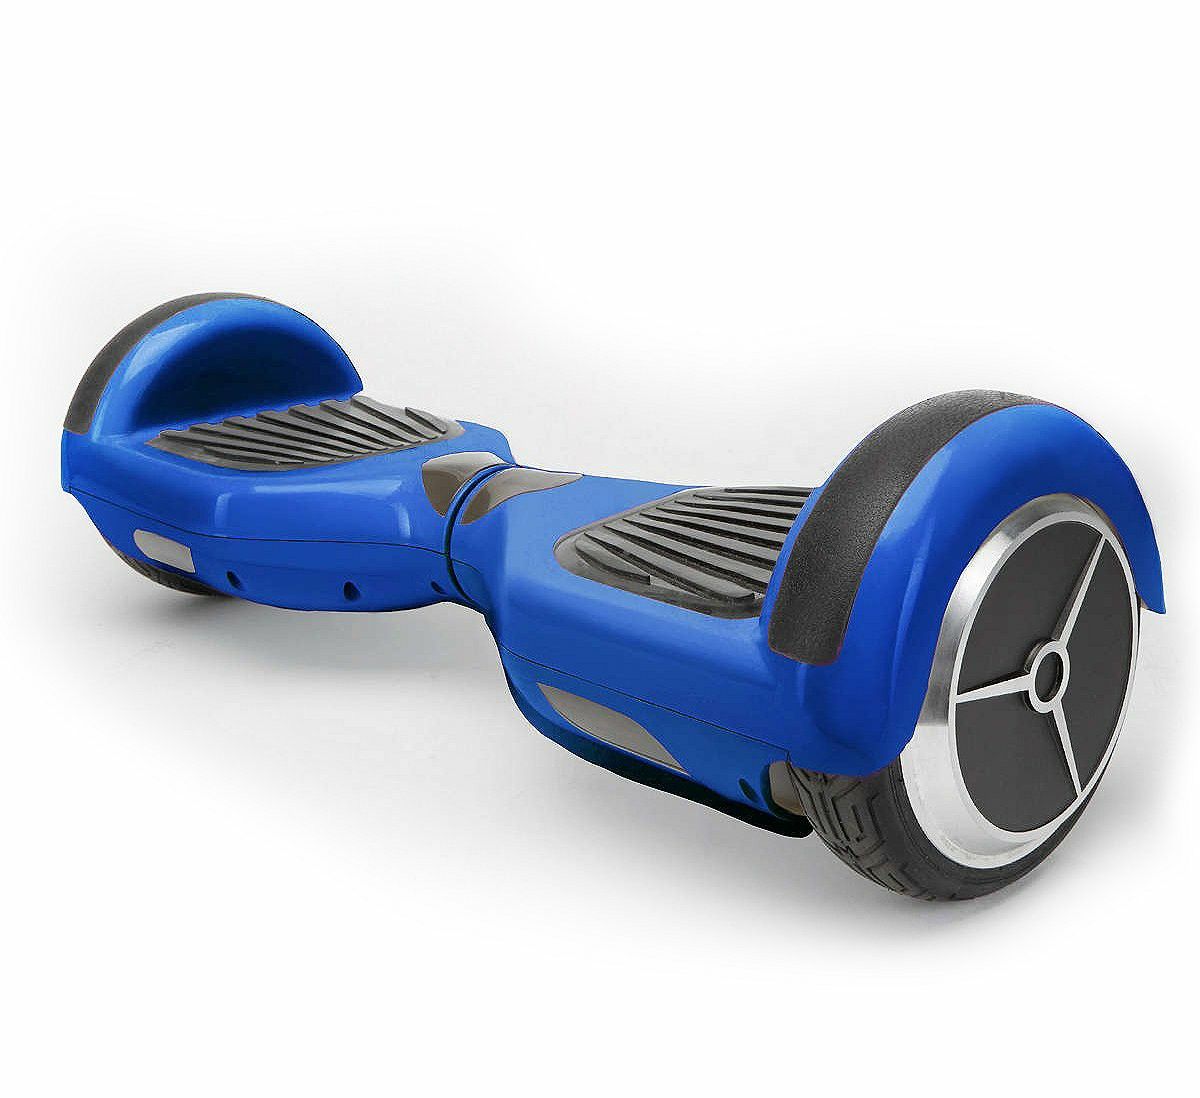 BRAND NEW Blue Hoverboard with led lights- comes with carry bag